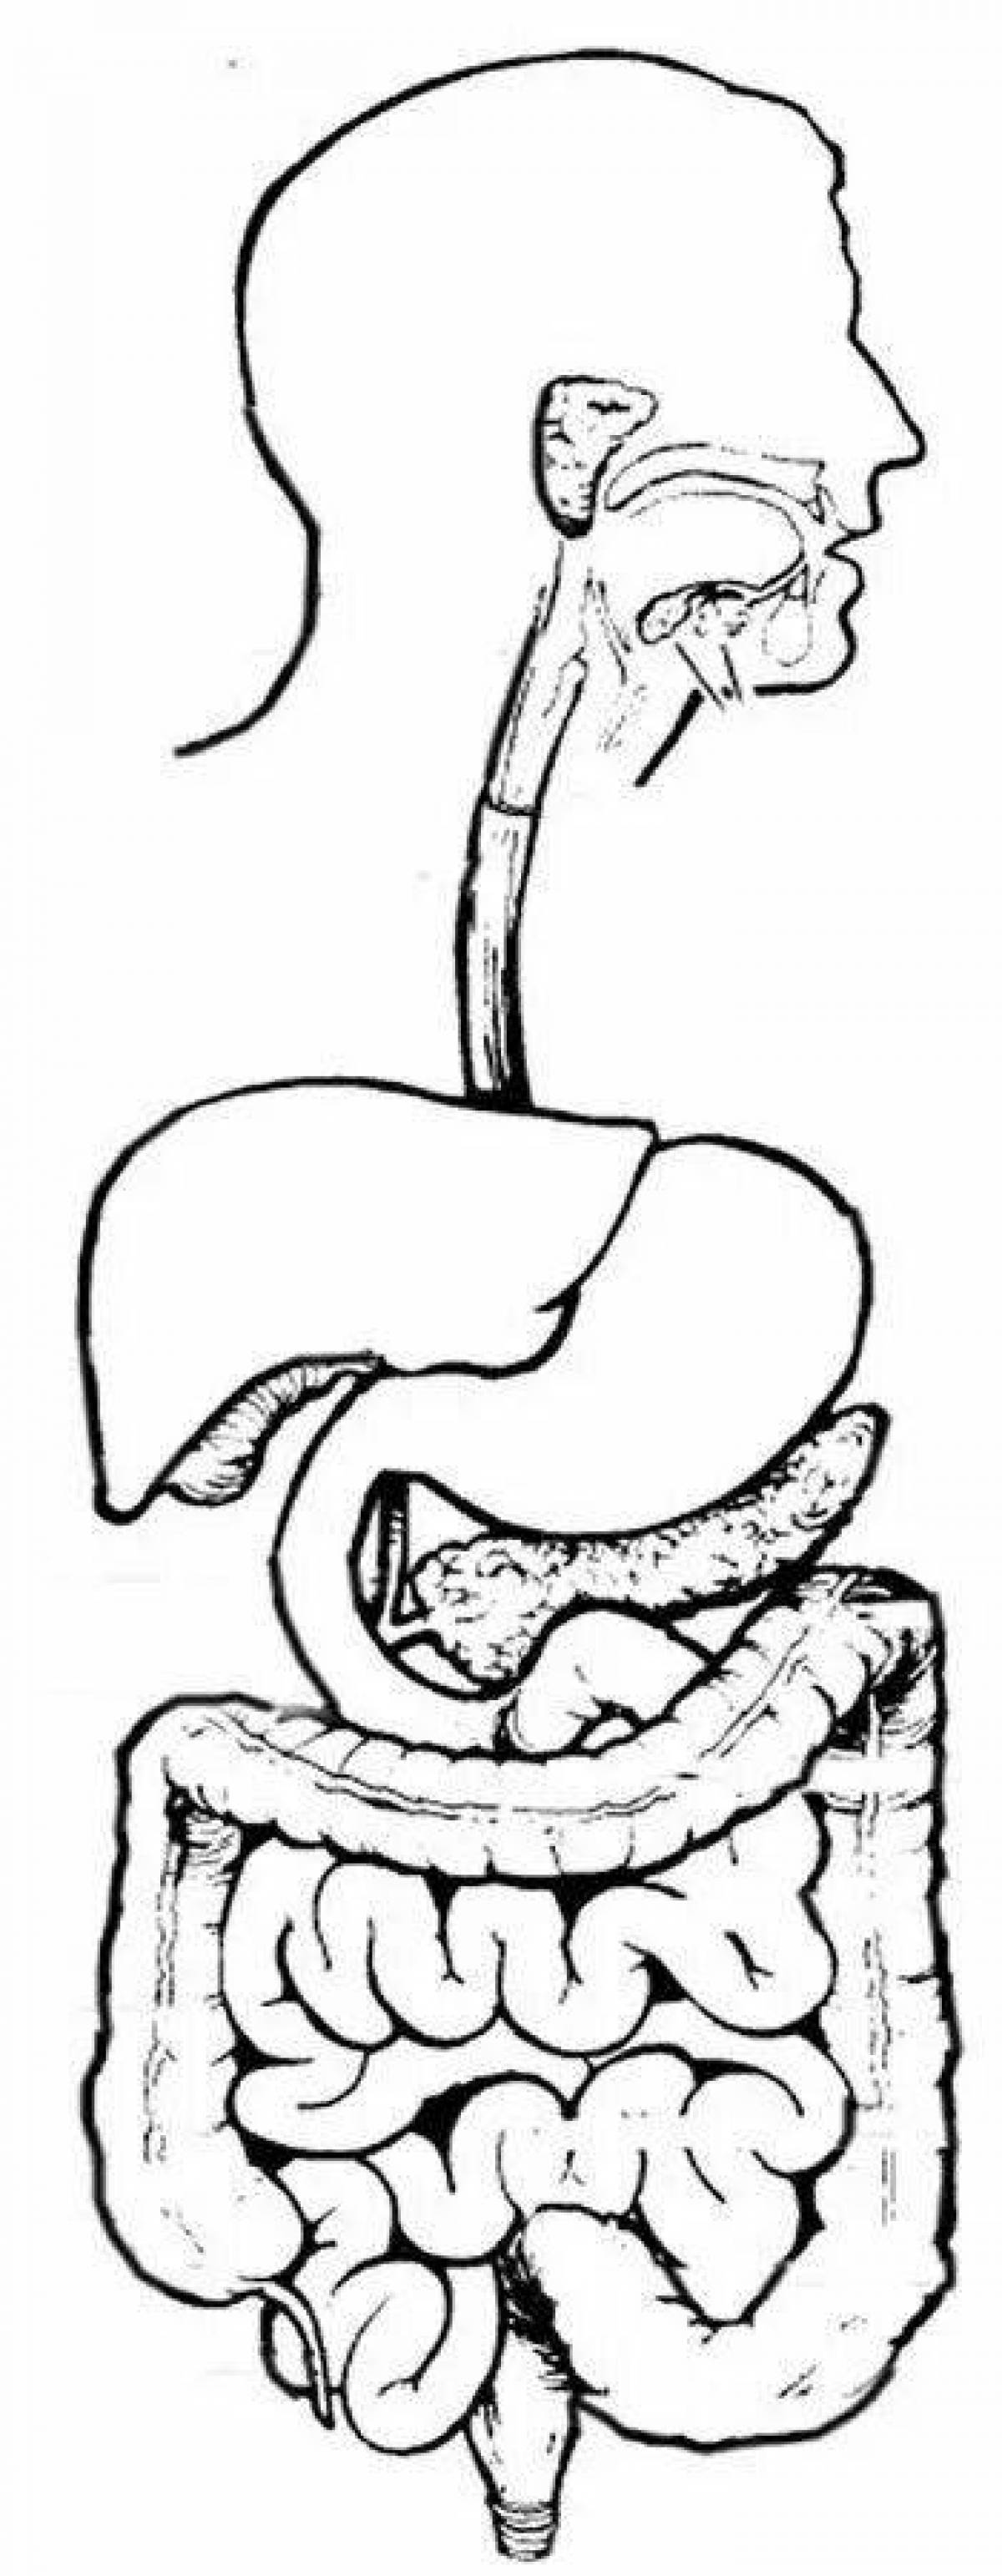 Digestive System Bright Coloring Page